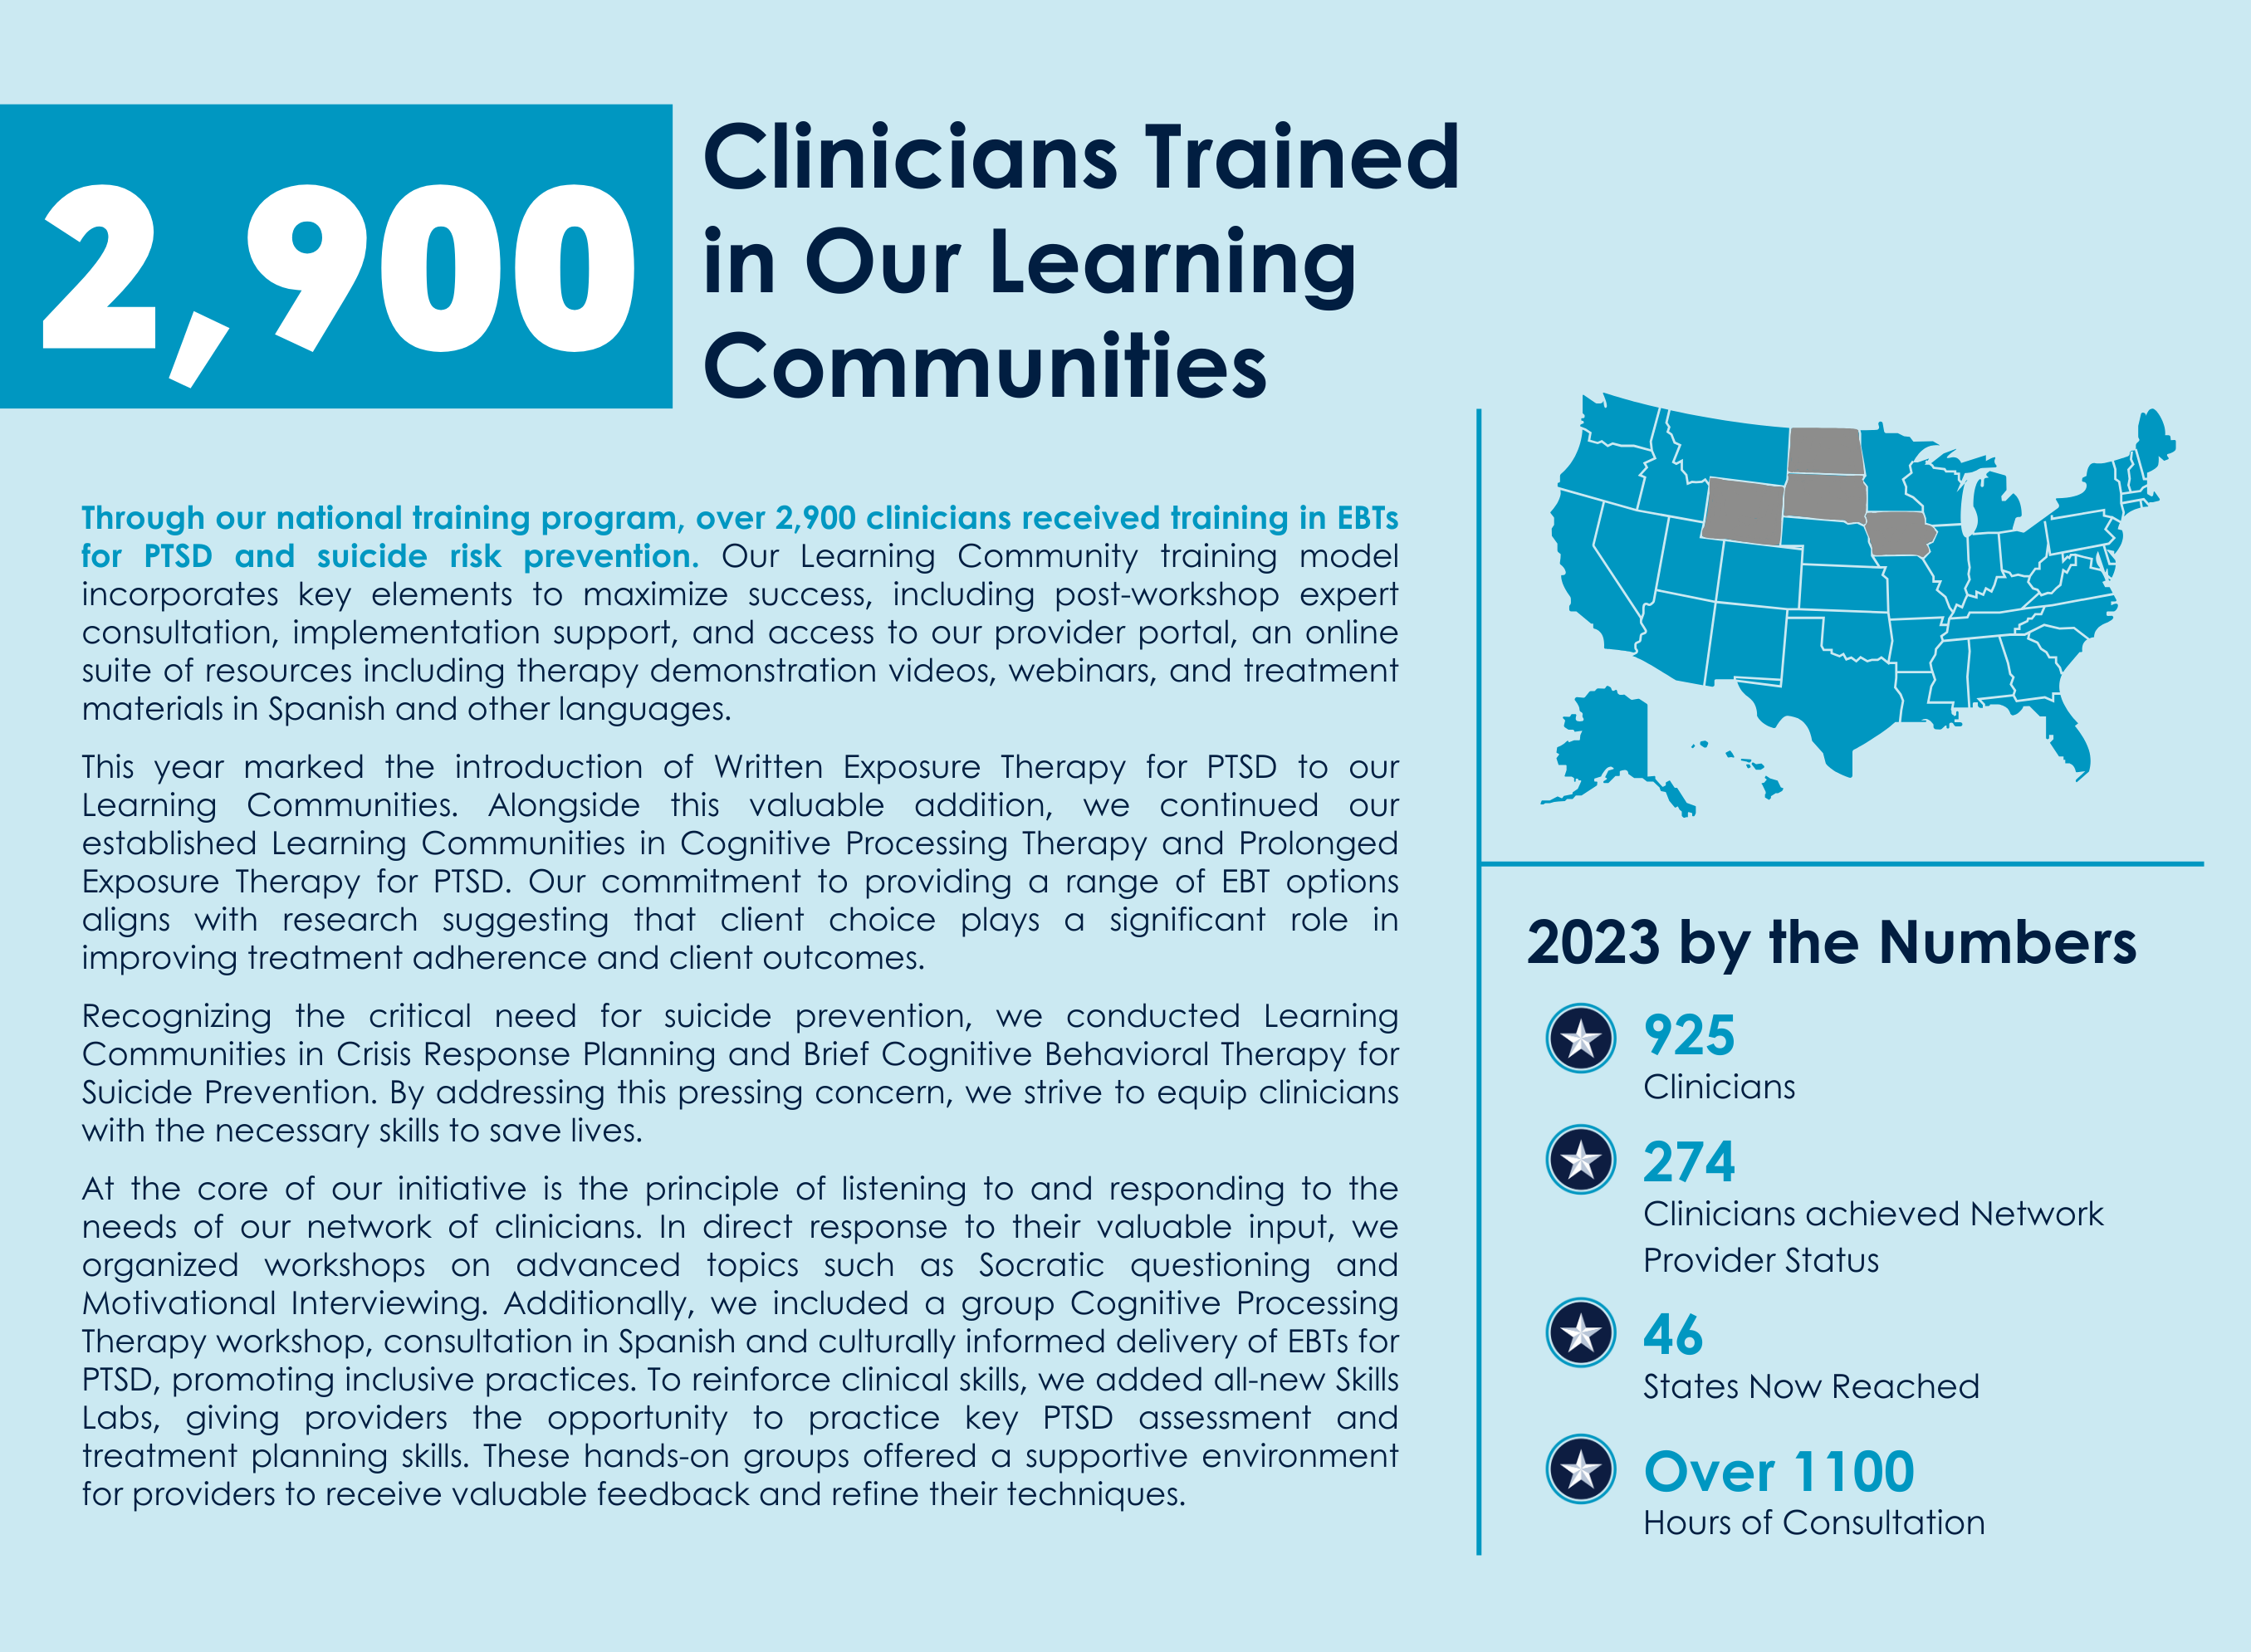 "2,900 Clinicians trained in our Learning Communities: Through our national training program, over 2,900 clinicians received training in EBTs for PTSD and suicide risk prevention. Our Learning Community training model incorporates key elements to maximize success, including post-workshop expert consultation, implementation support, and access to our provider portal, an online suite of resources including therapy demonstration videos, webinars, and treatment materials in Spanish and other languages. This year marked the introduction of Written Exposure Therapy for PTSD to our Learning Communities. Alongside this valuable addition, we continued our established Learning Communities in Cognitive Processing Therapy and Prolonged Exposure Therapy for PTSD. Our commitment to providing a range of EBT options aligns with research suggesting that client choice plays a significant role in improving treatment adherence and client outcomes. Recognizing the critical need for suicide prevention, we conducted Learning Communities in Crisis Response Planning and Brief Cognitive Behavioral Therapy for Suicide Prevention. By addressing this pressing concern, we strive to equip clinicians with the necessary skills to save lives. At the core of our initiative is the principle of listening to and responding to the needs of our network of clinicians. In direct response to their valuable input, we organized workshops on advanced topics such as Socratic questioning and Motivational Interviewing. Additionally, we included a group Cognitive Processing Therapy workshop, consultation in Spanish and culturally informed delivery of EBTs for PTSD, promoting inclusive practices. To reinforce clinical skills, we added all-new Skills Labs, giving providers the opportunity to practice key PTSD assessment and treatment planning skills. These hands-on groups offered a supportive environment for providers to receive valuable feedback and refine their techniques." To the side of main text reads, "2023 by the Numbers: 925 Clinicians Trained, 274 Clinicians achieved Network Provider Status, 46 States Now Reached, Over 1100 Hours of Consultation."